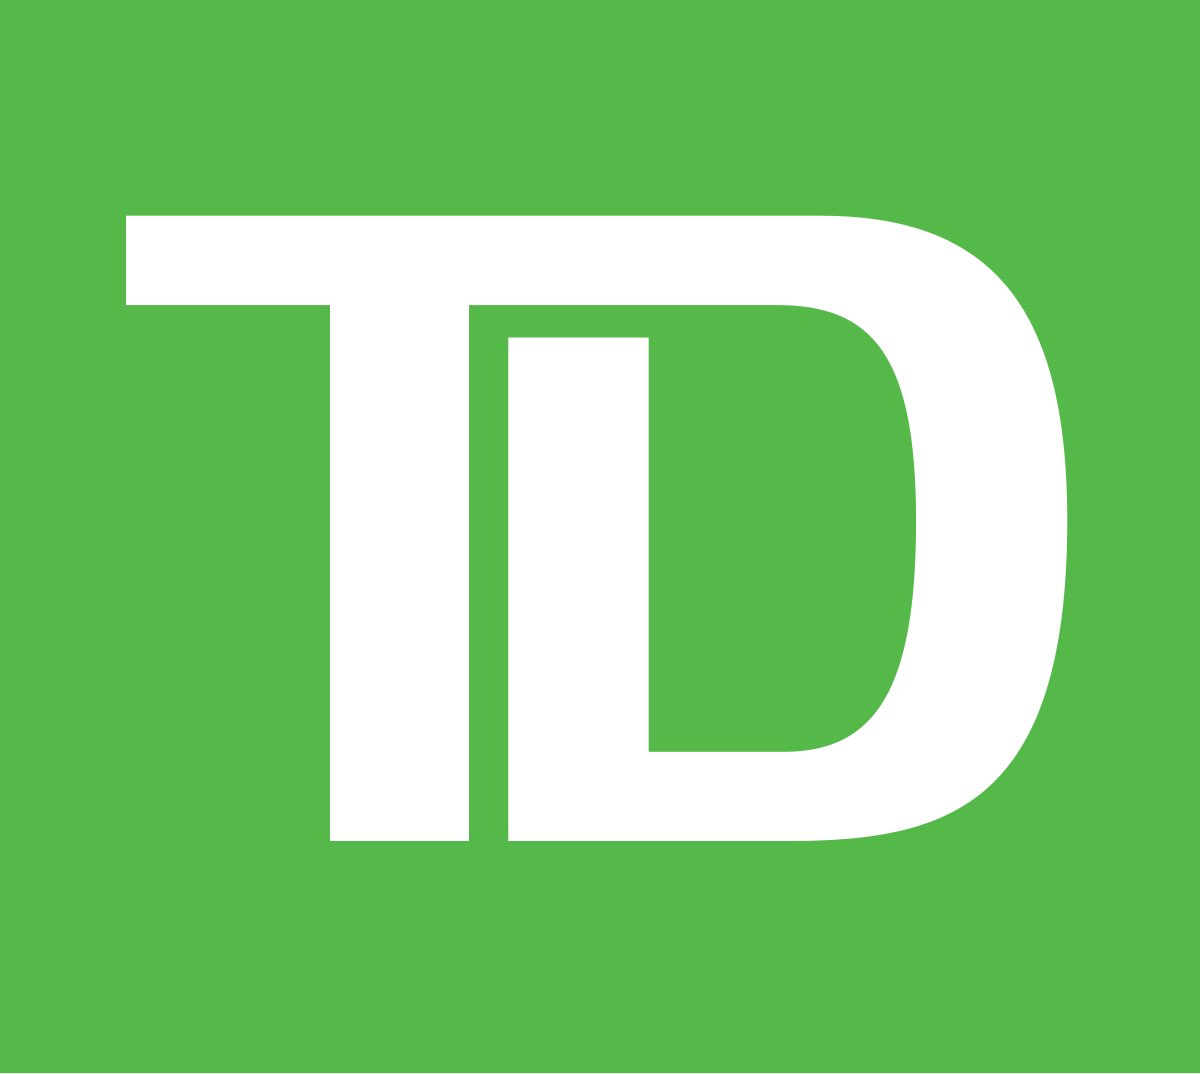 TD Canada Bank Data Scientist, earning an average of $98,000 annually, was terminated after sharing a video boasting about the abundance of 'free food' he receives from charity food banks.